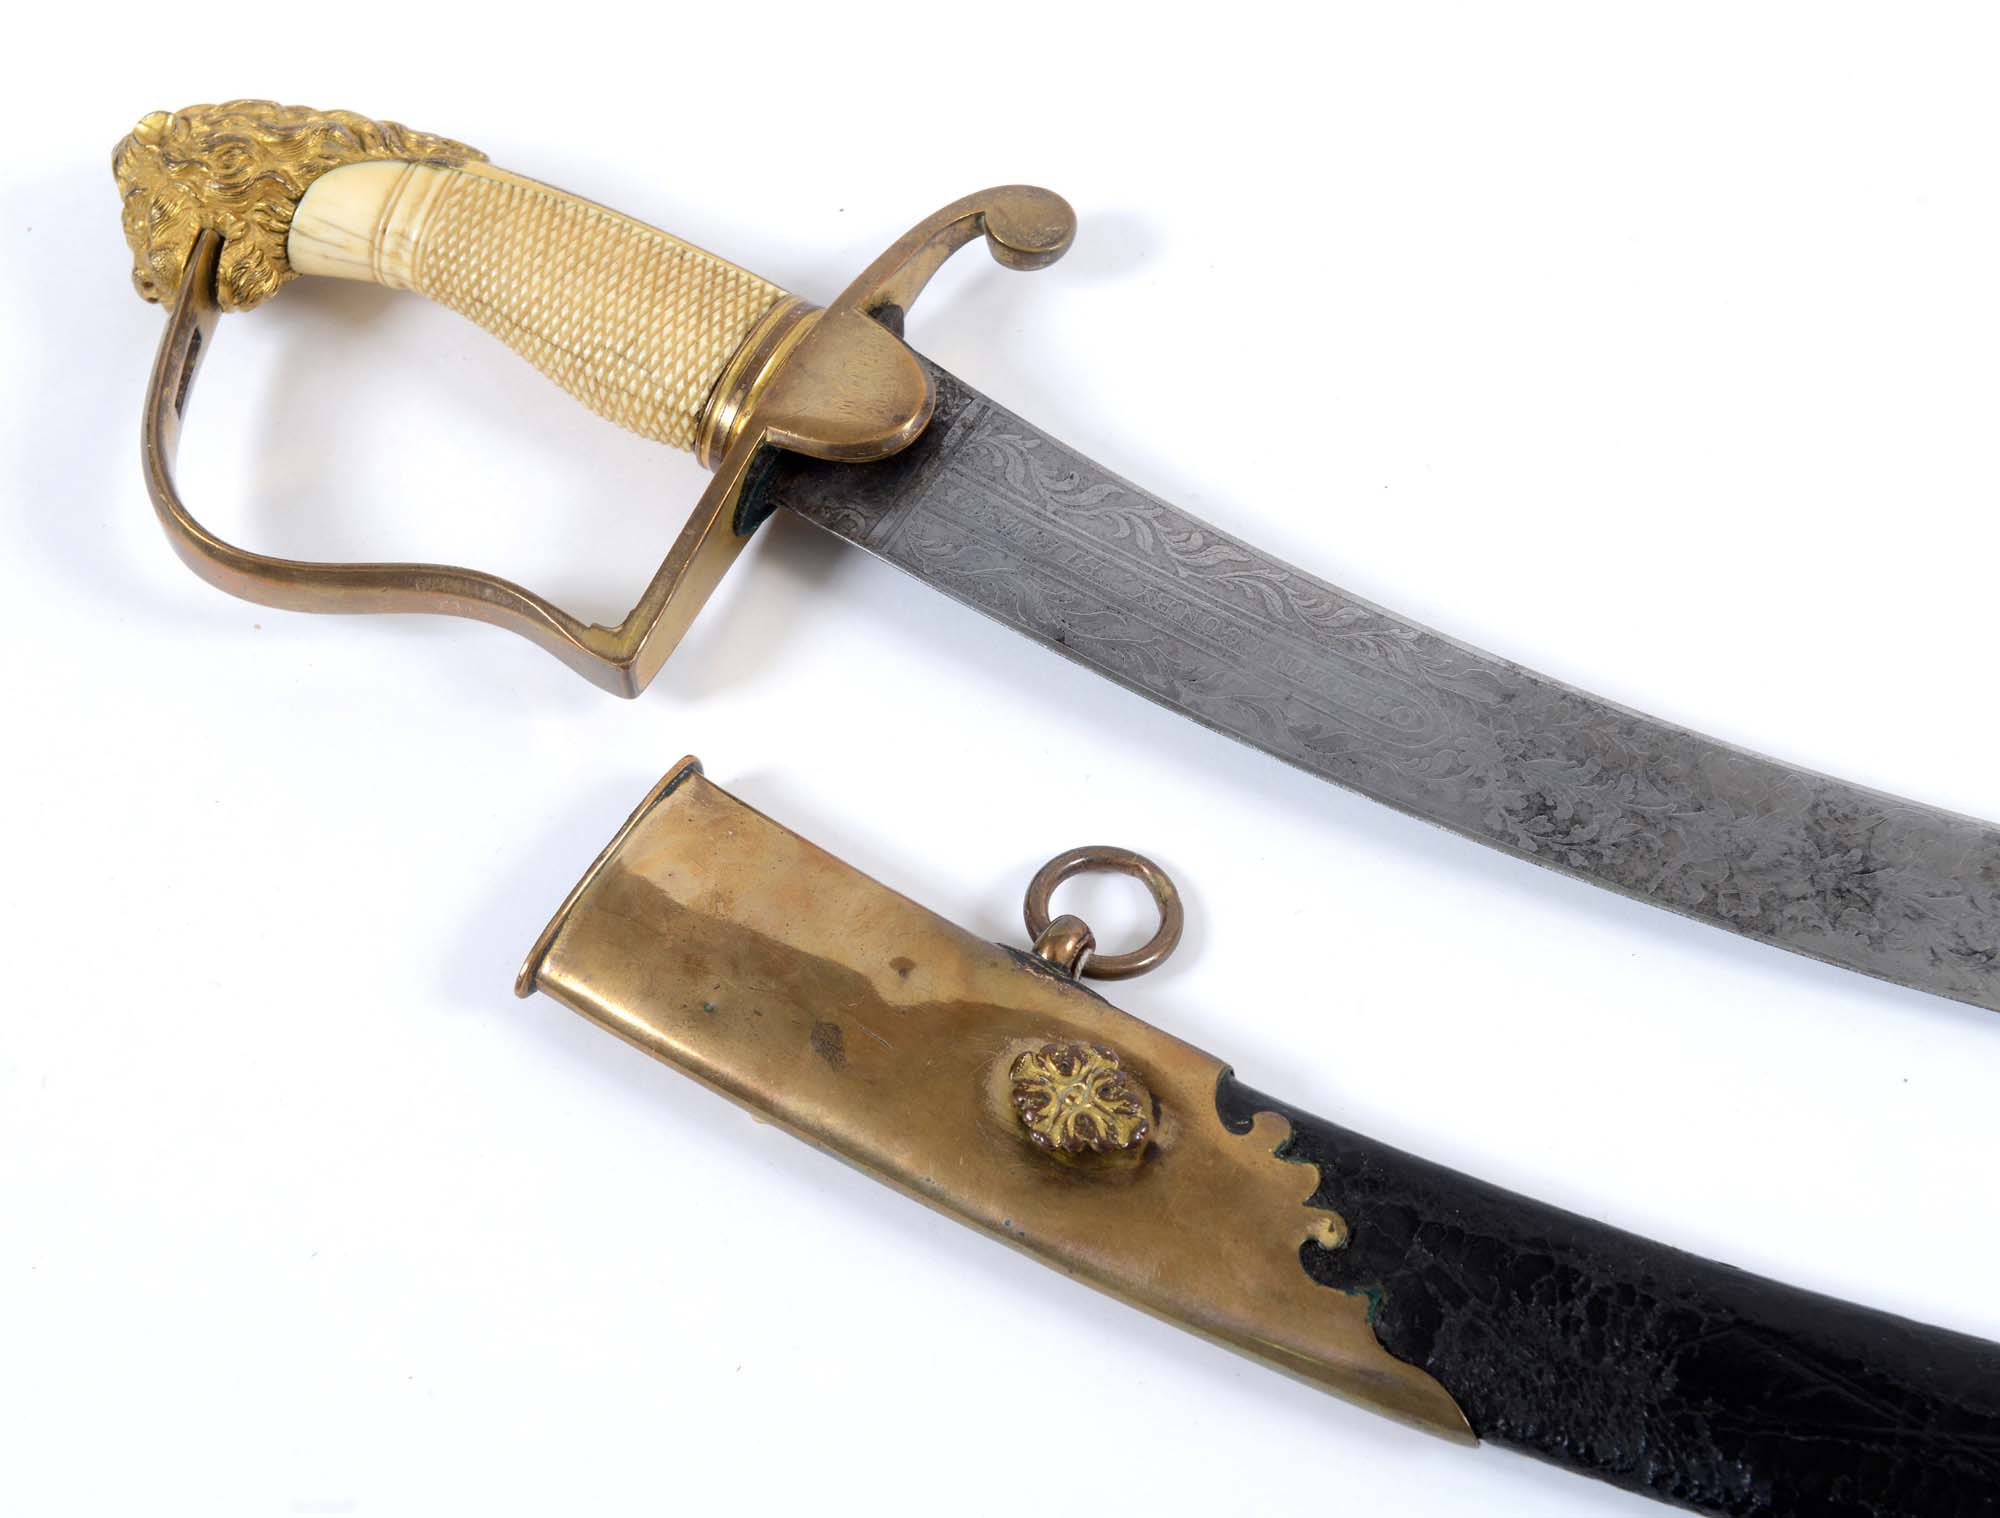 A GEORGIAN OFFICERS SWORD. A highly decorated sword by Osborn & Gunby, C1806-1808 period. Ivory